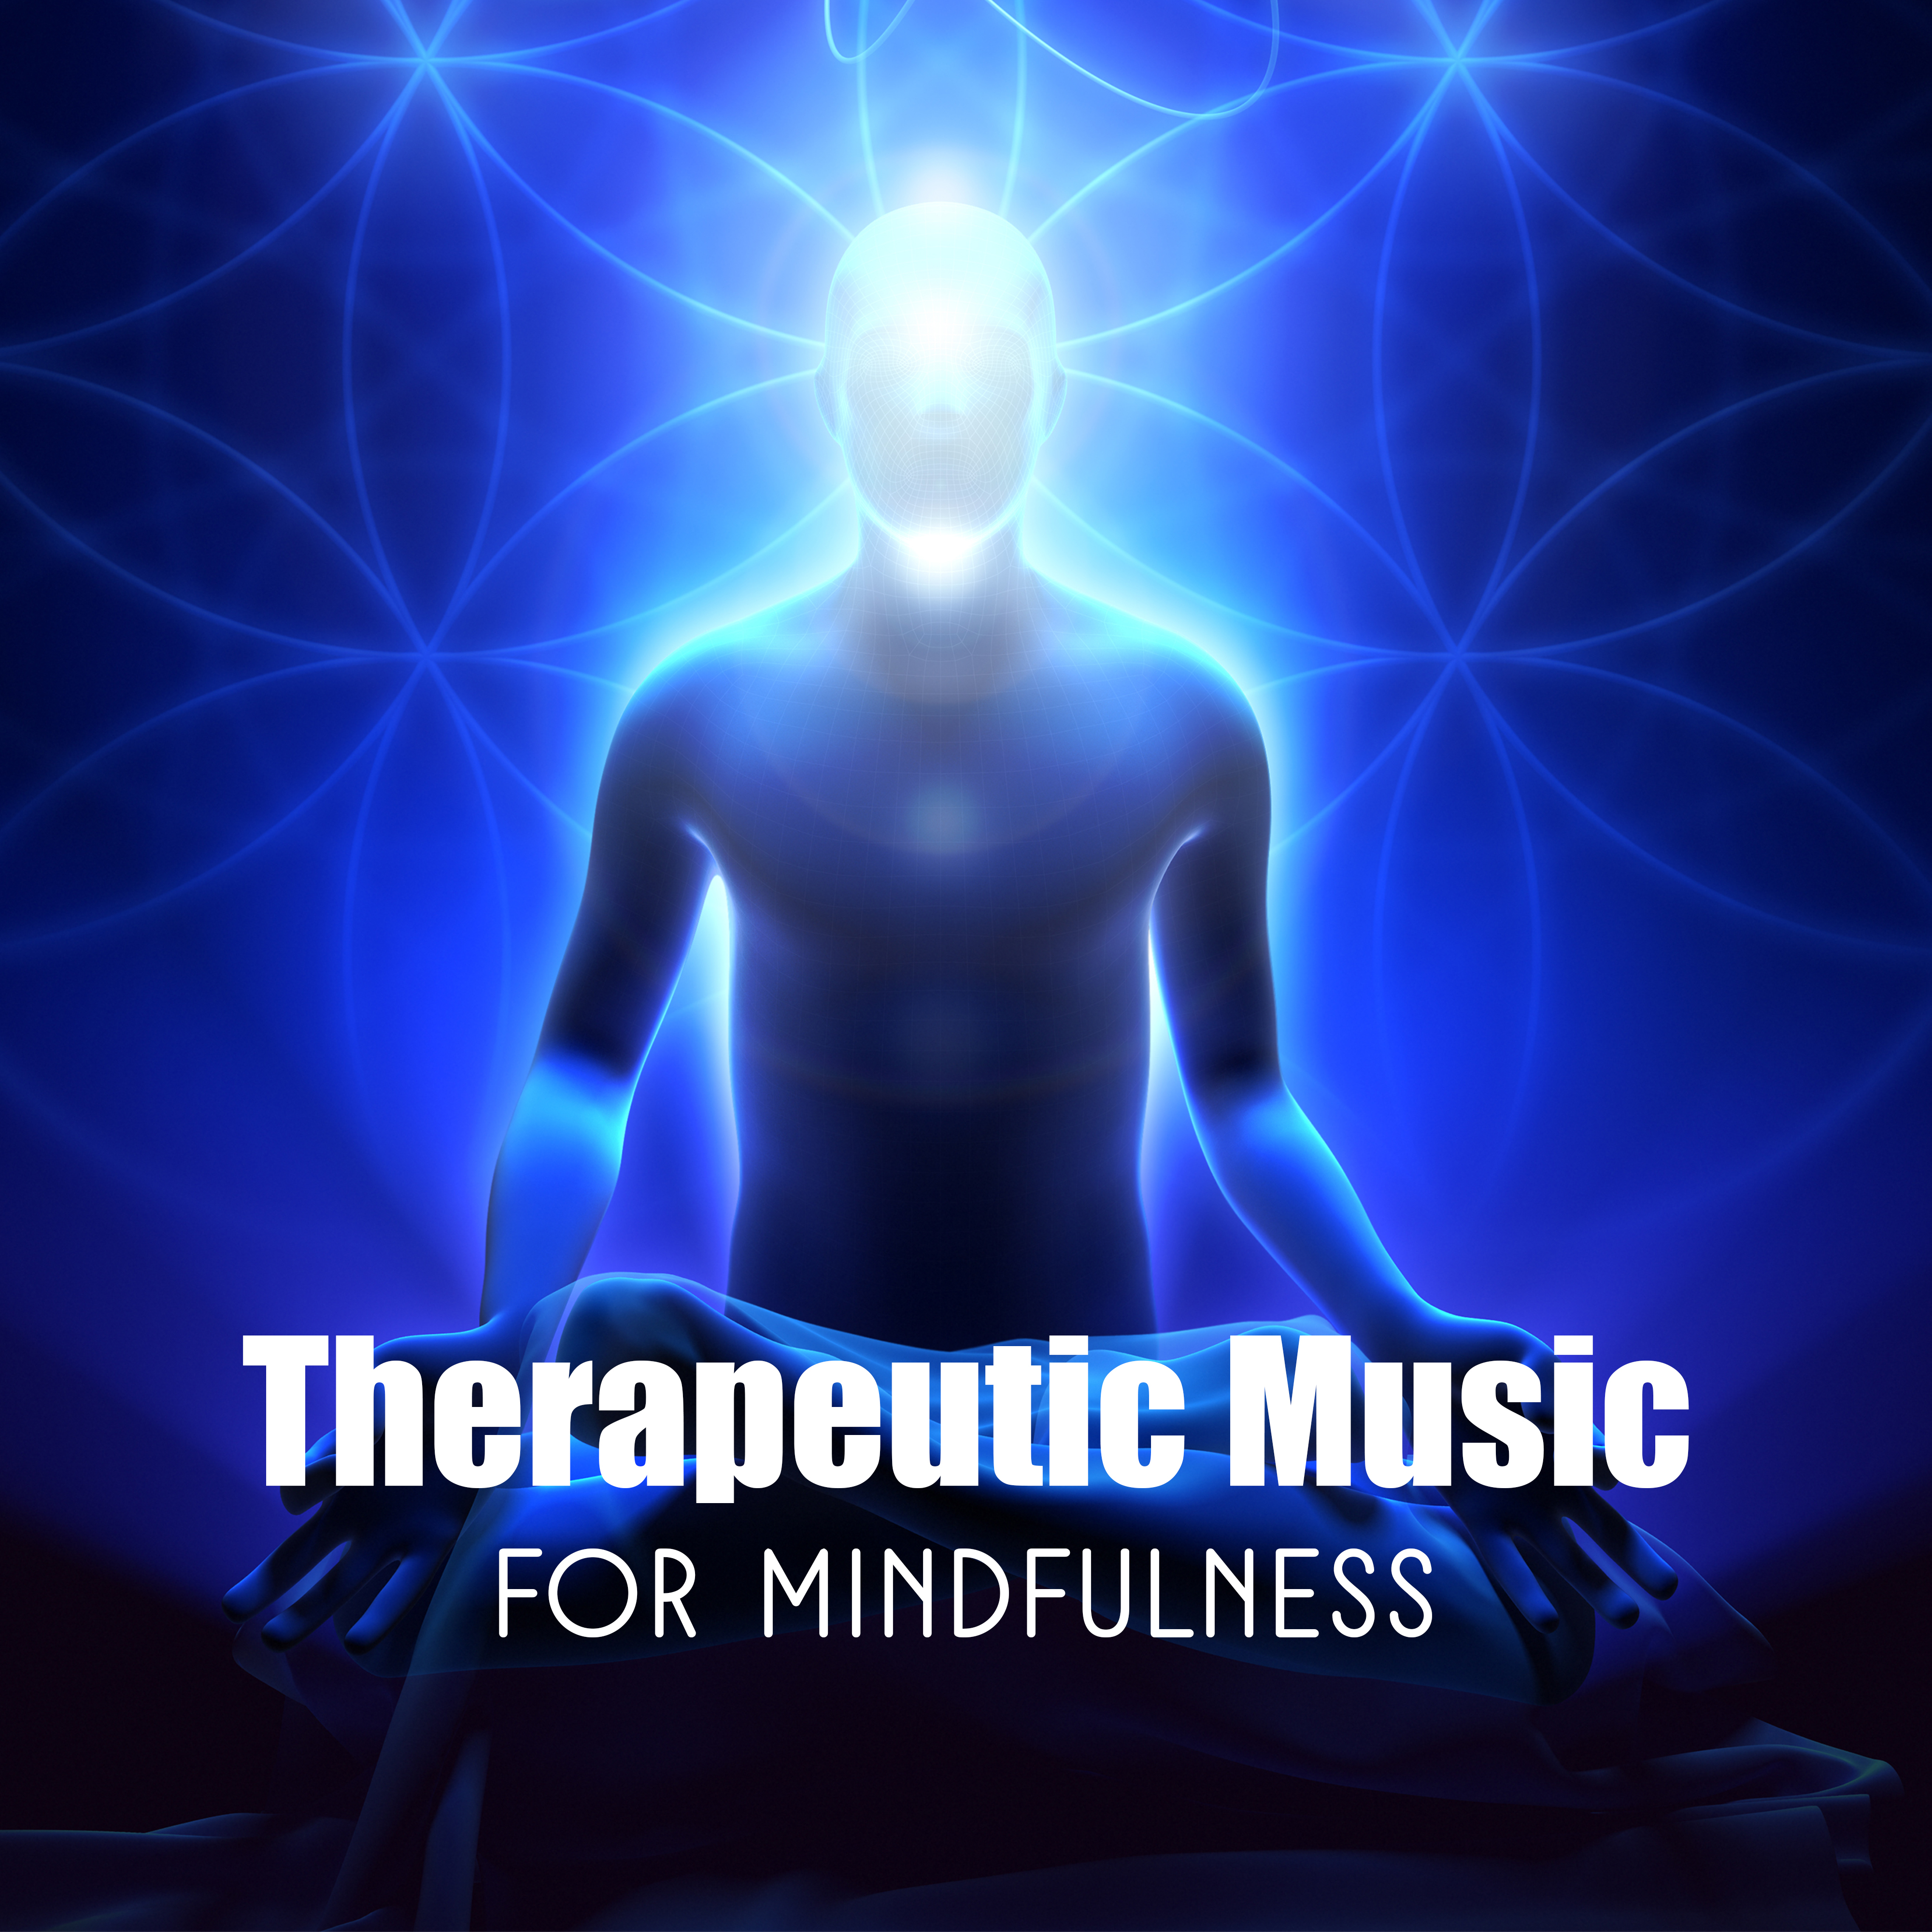 Therapeutic Music for Mindfulness